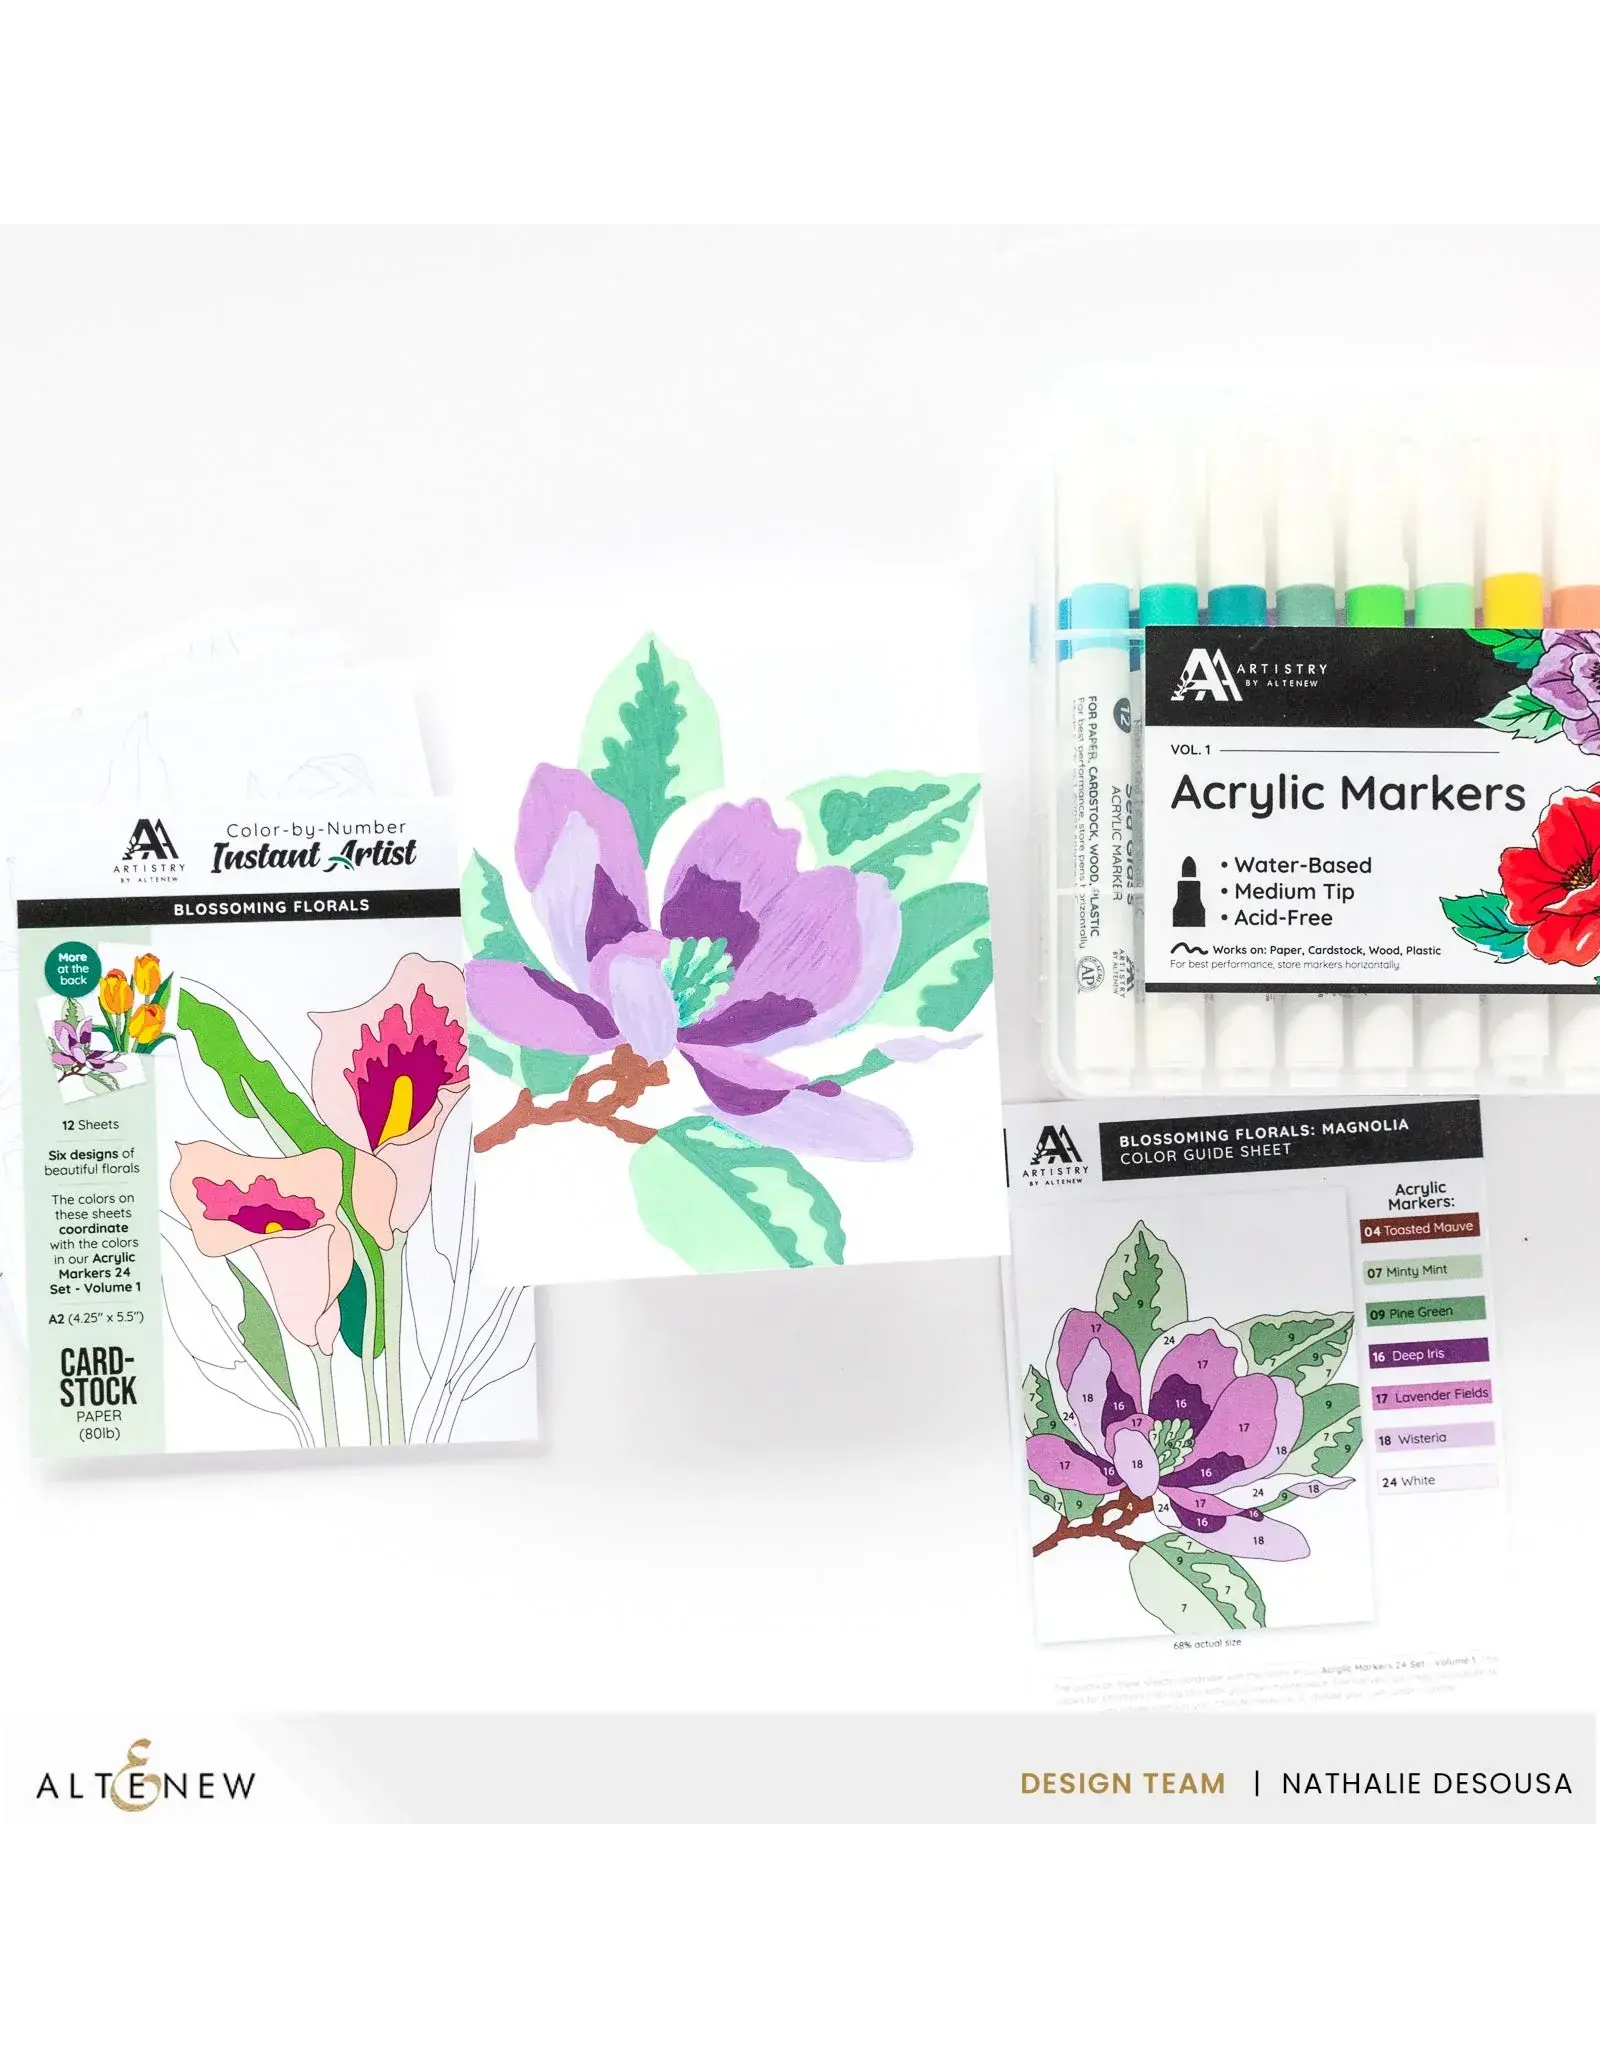 ALTENEW ALTENEW ARTISTRY COLOR-BY-NUMBER INSTANT ARTIST BLOSSOMING FLORALS 12 SHEETS